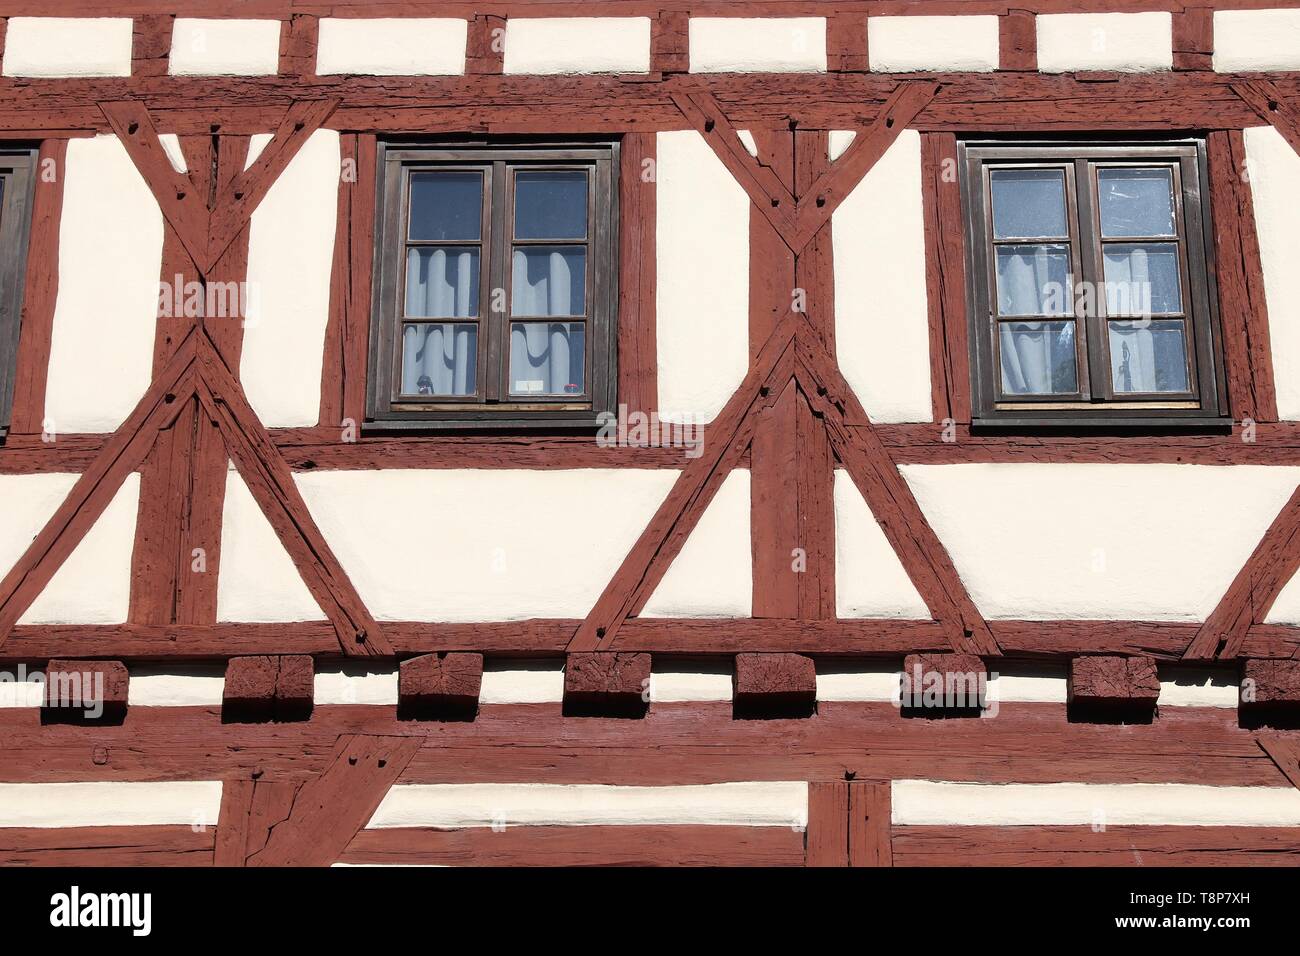 Timber framing in Germany - old residential architecture in Nuremberg. Stock Photo